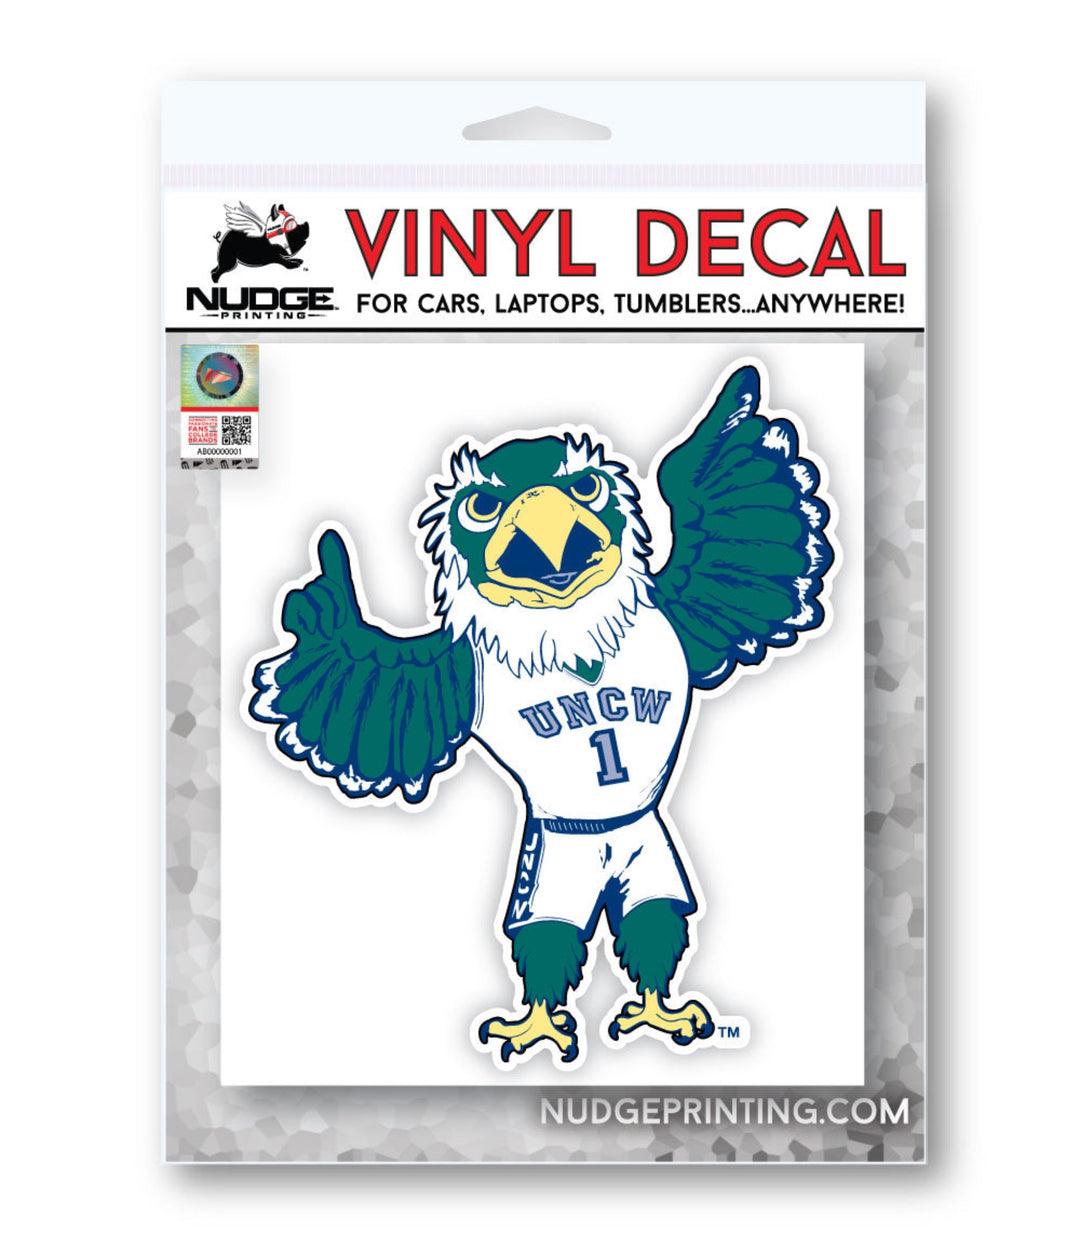 UNC Wilmington Sammy C Hawk Mascot in Uniform Car Decal Package for Cars, Laptops, Water Bottles, and Cornhole Boards